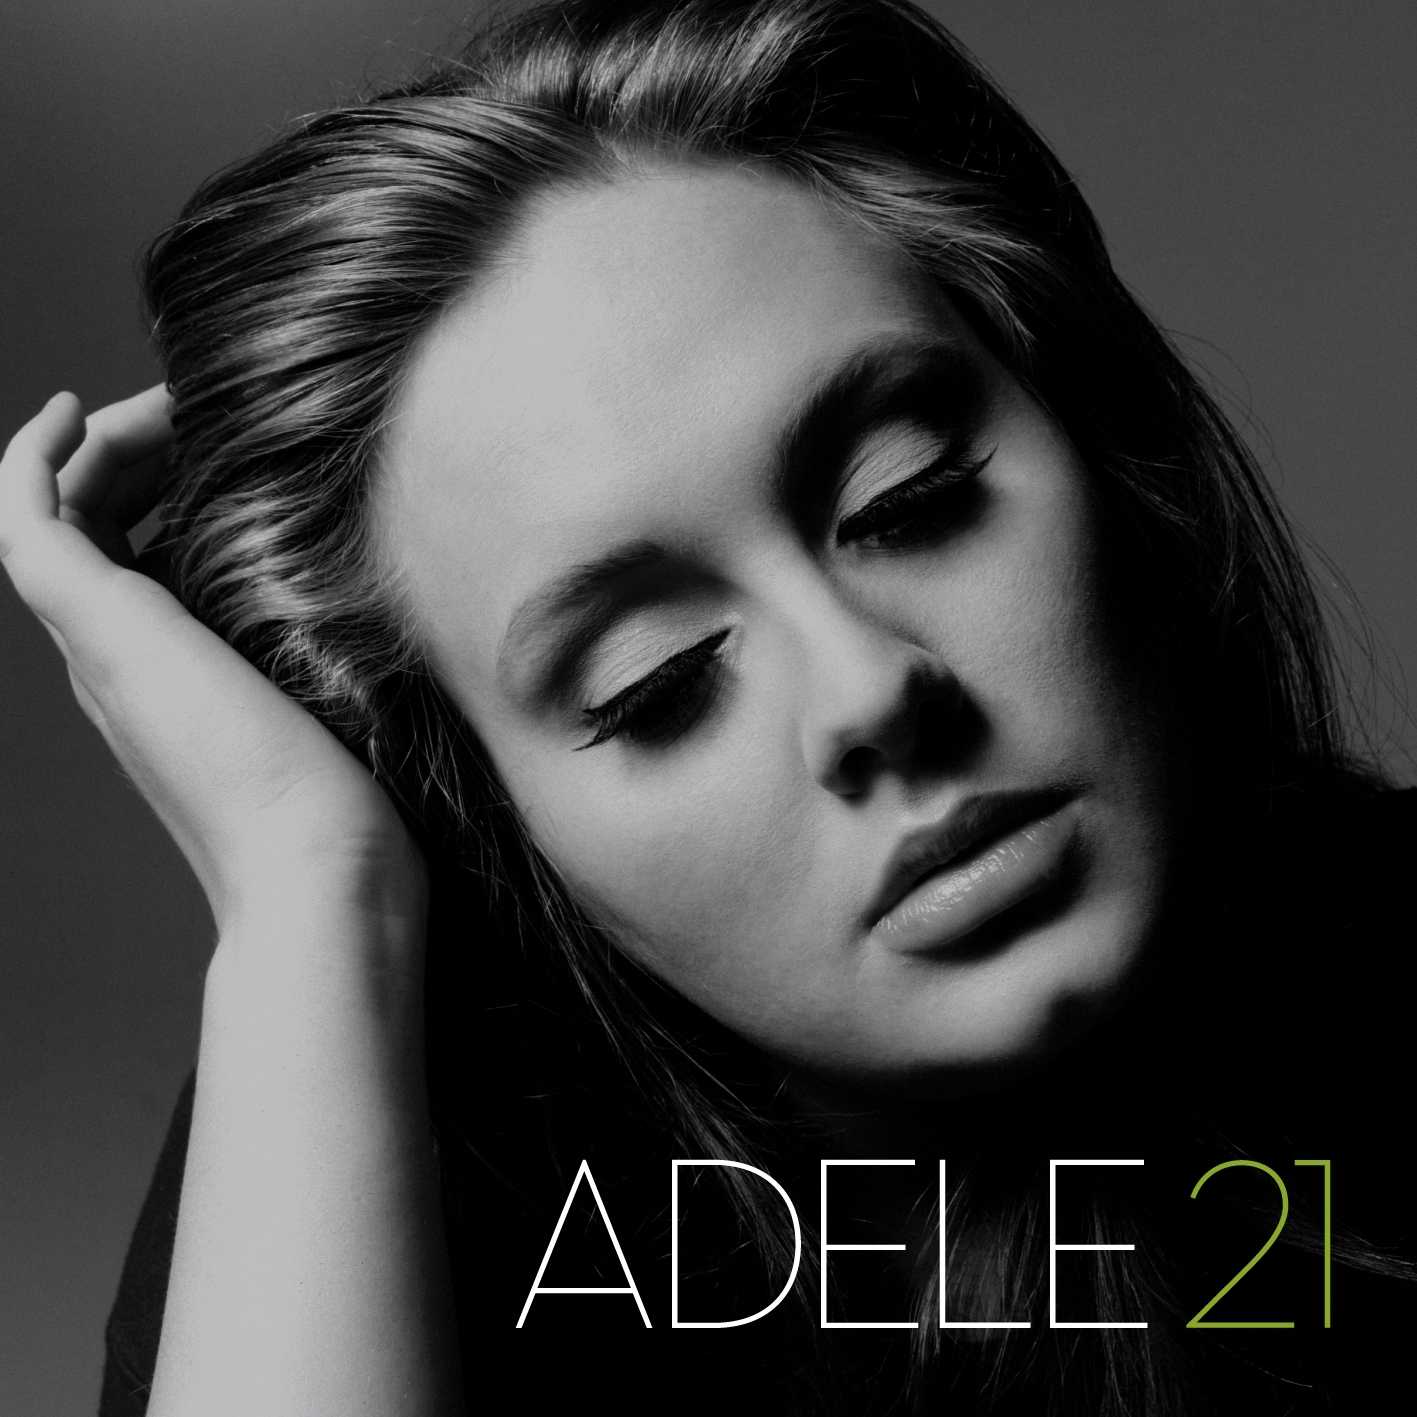 Spot On The Covers!: Adele - 21 (Official Album Cover)1417 x 1417